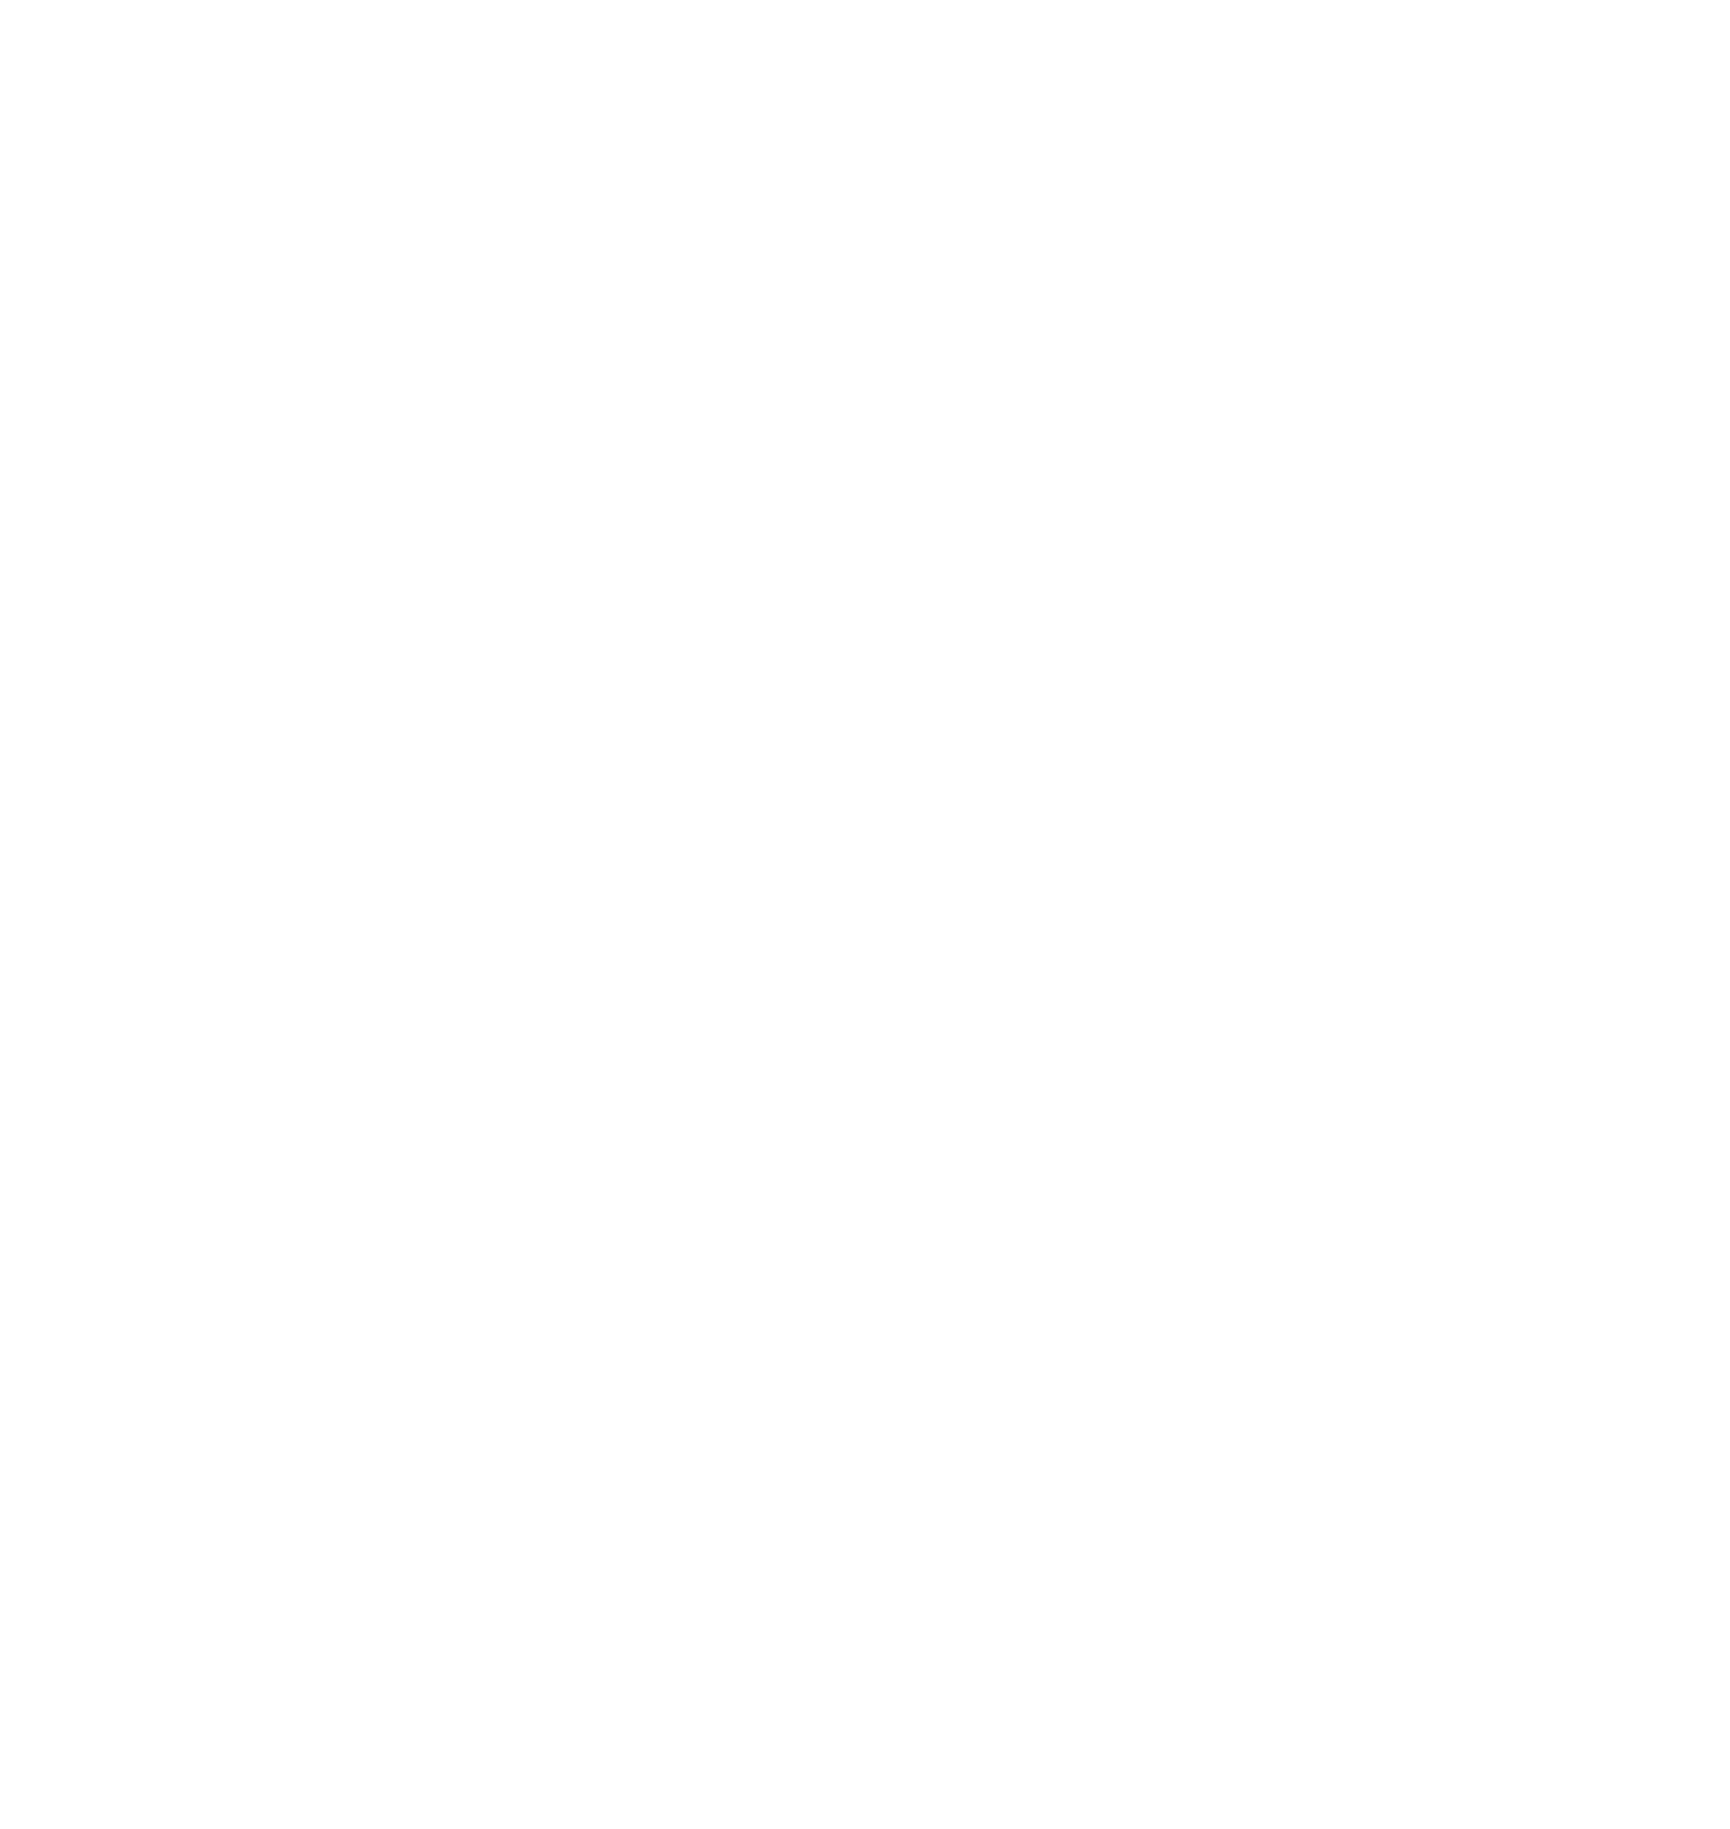 Dronninglund Cup